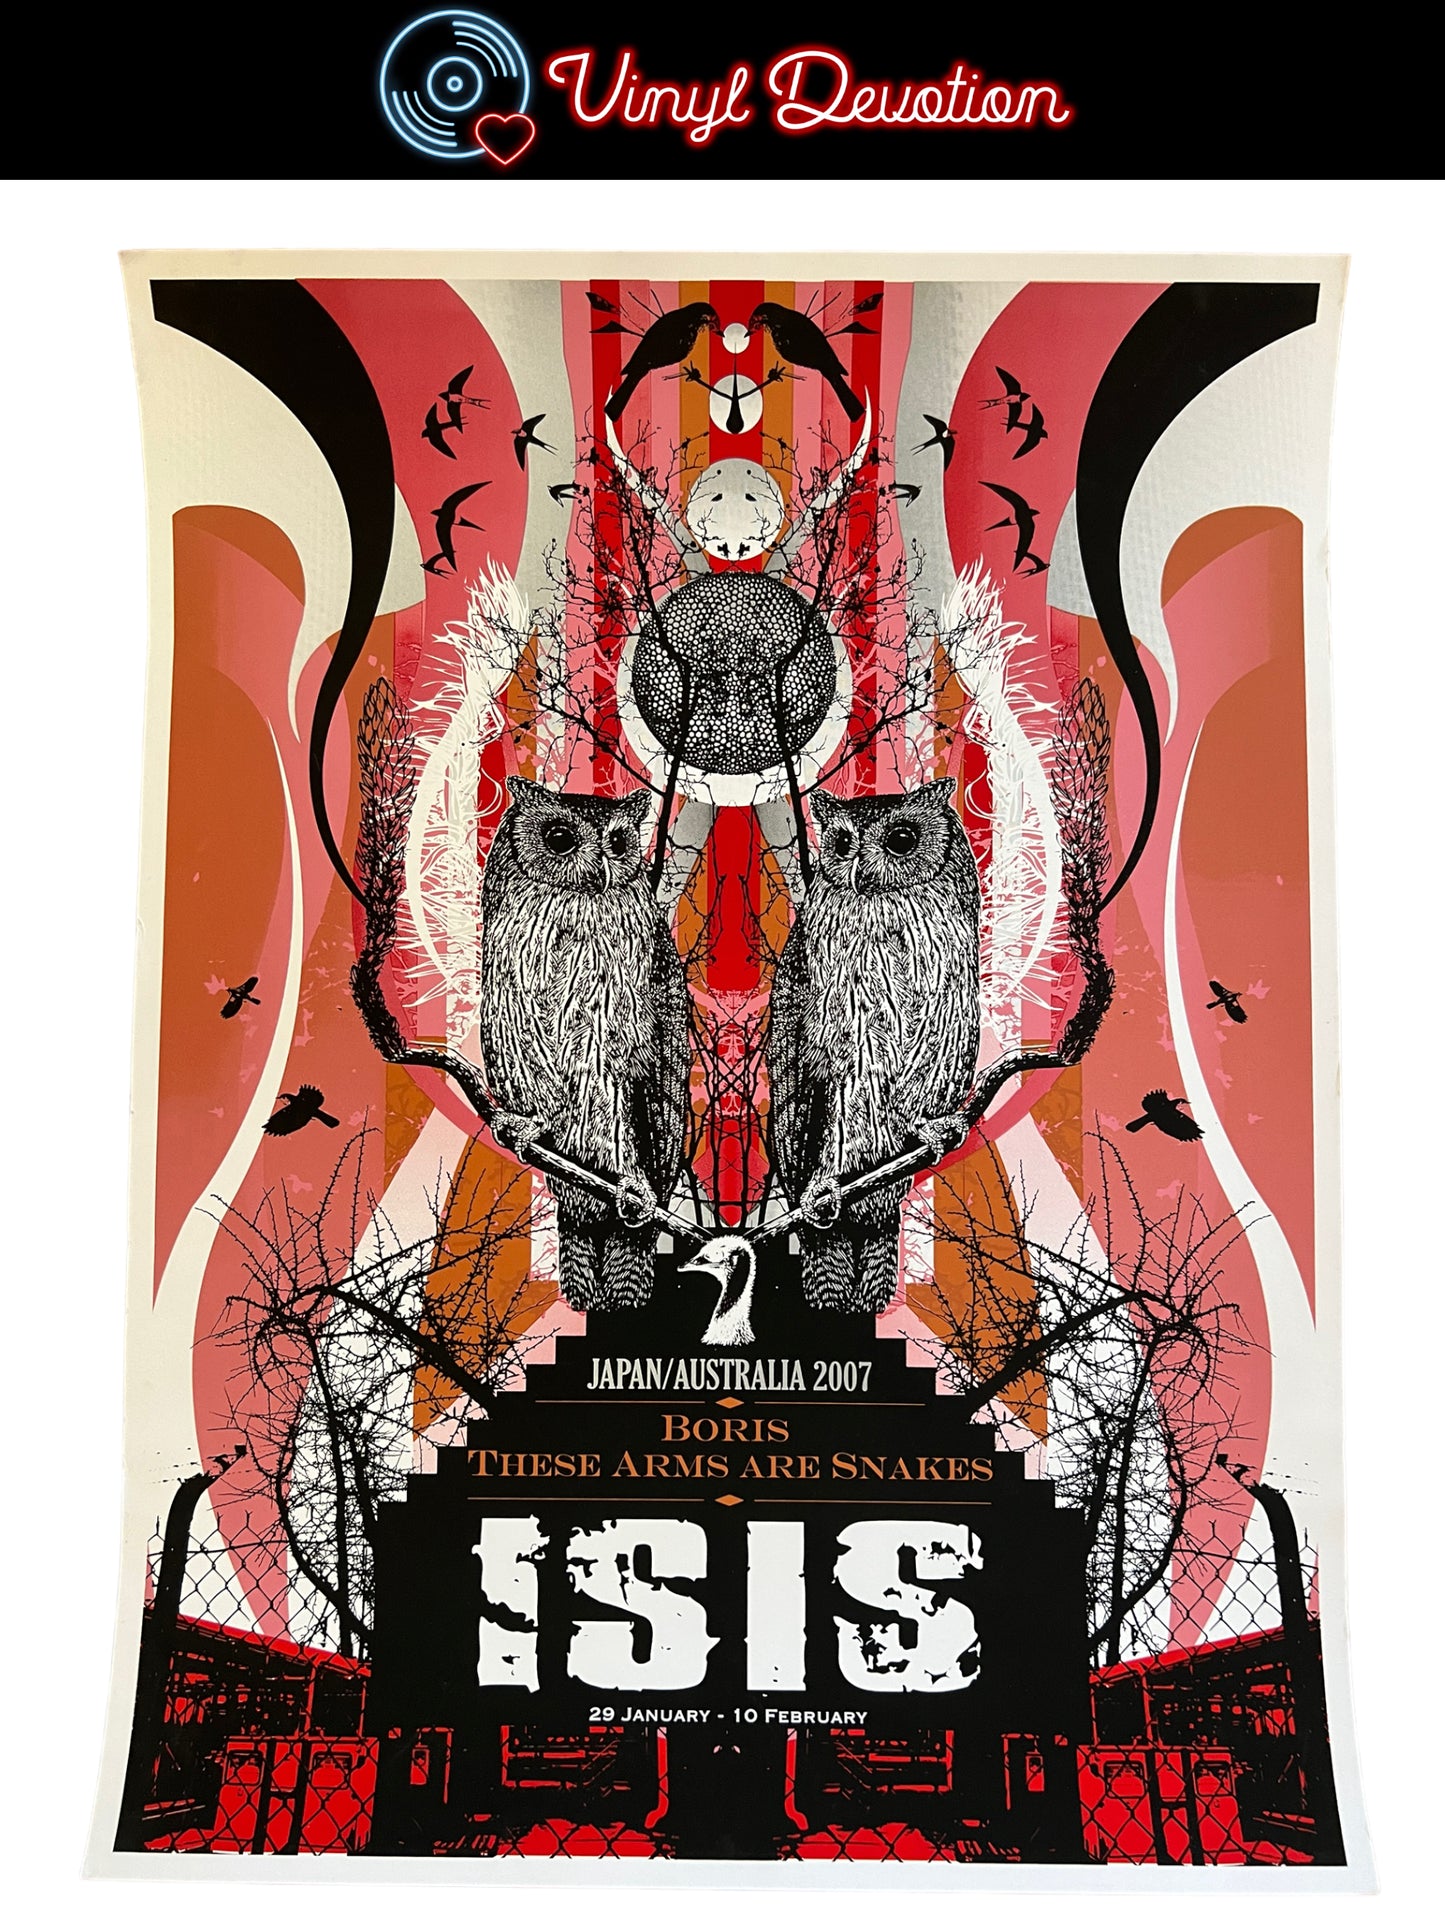 Isis The Band / Boris/ These Arms Are Snakes Japan Australia 2007 Silkscreen Tour Poster 19 x 25 inches